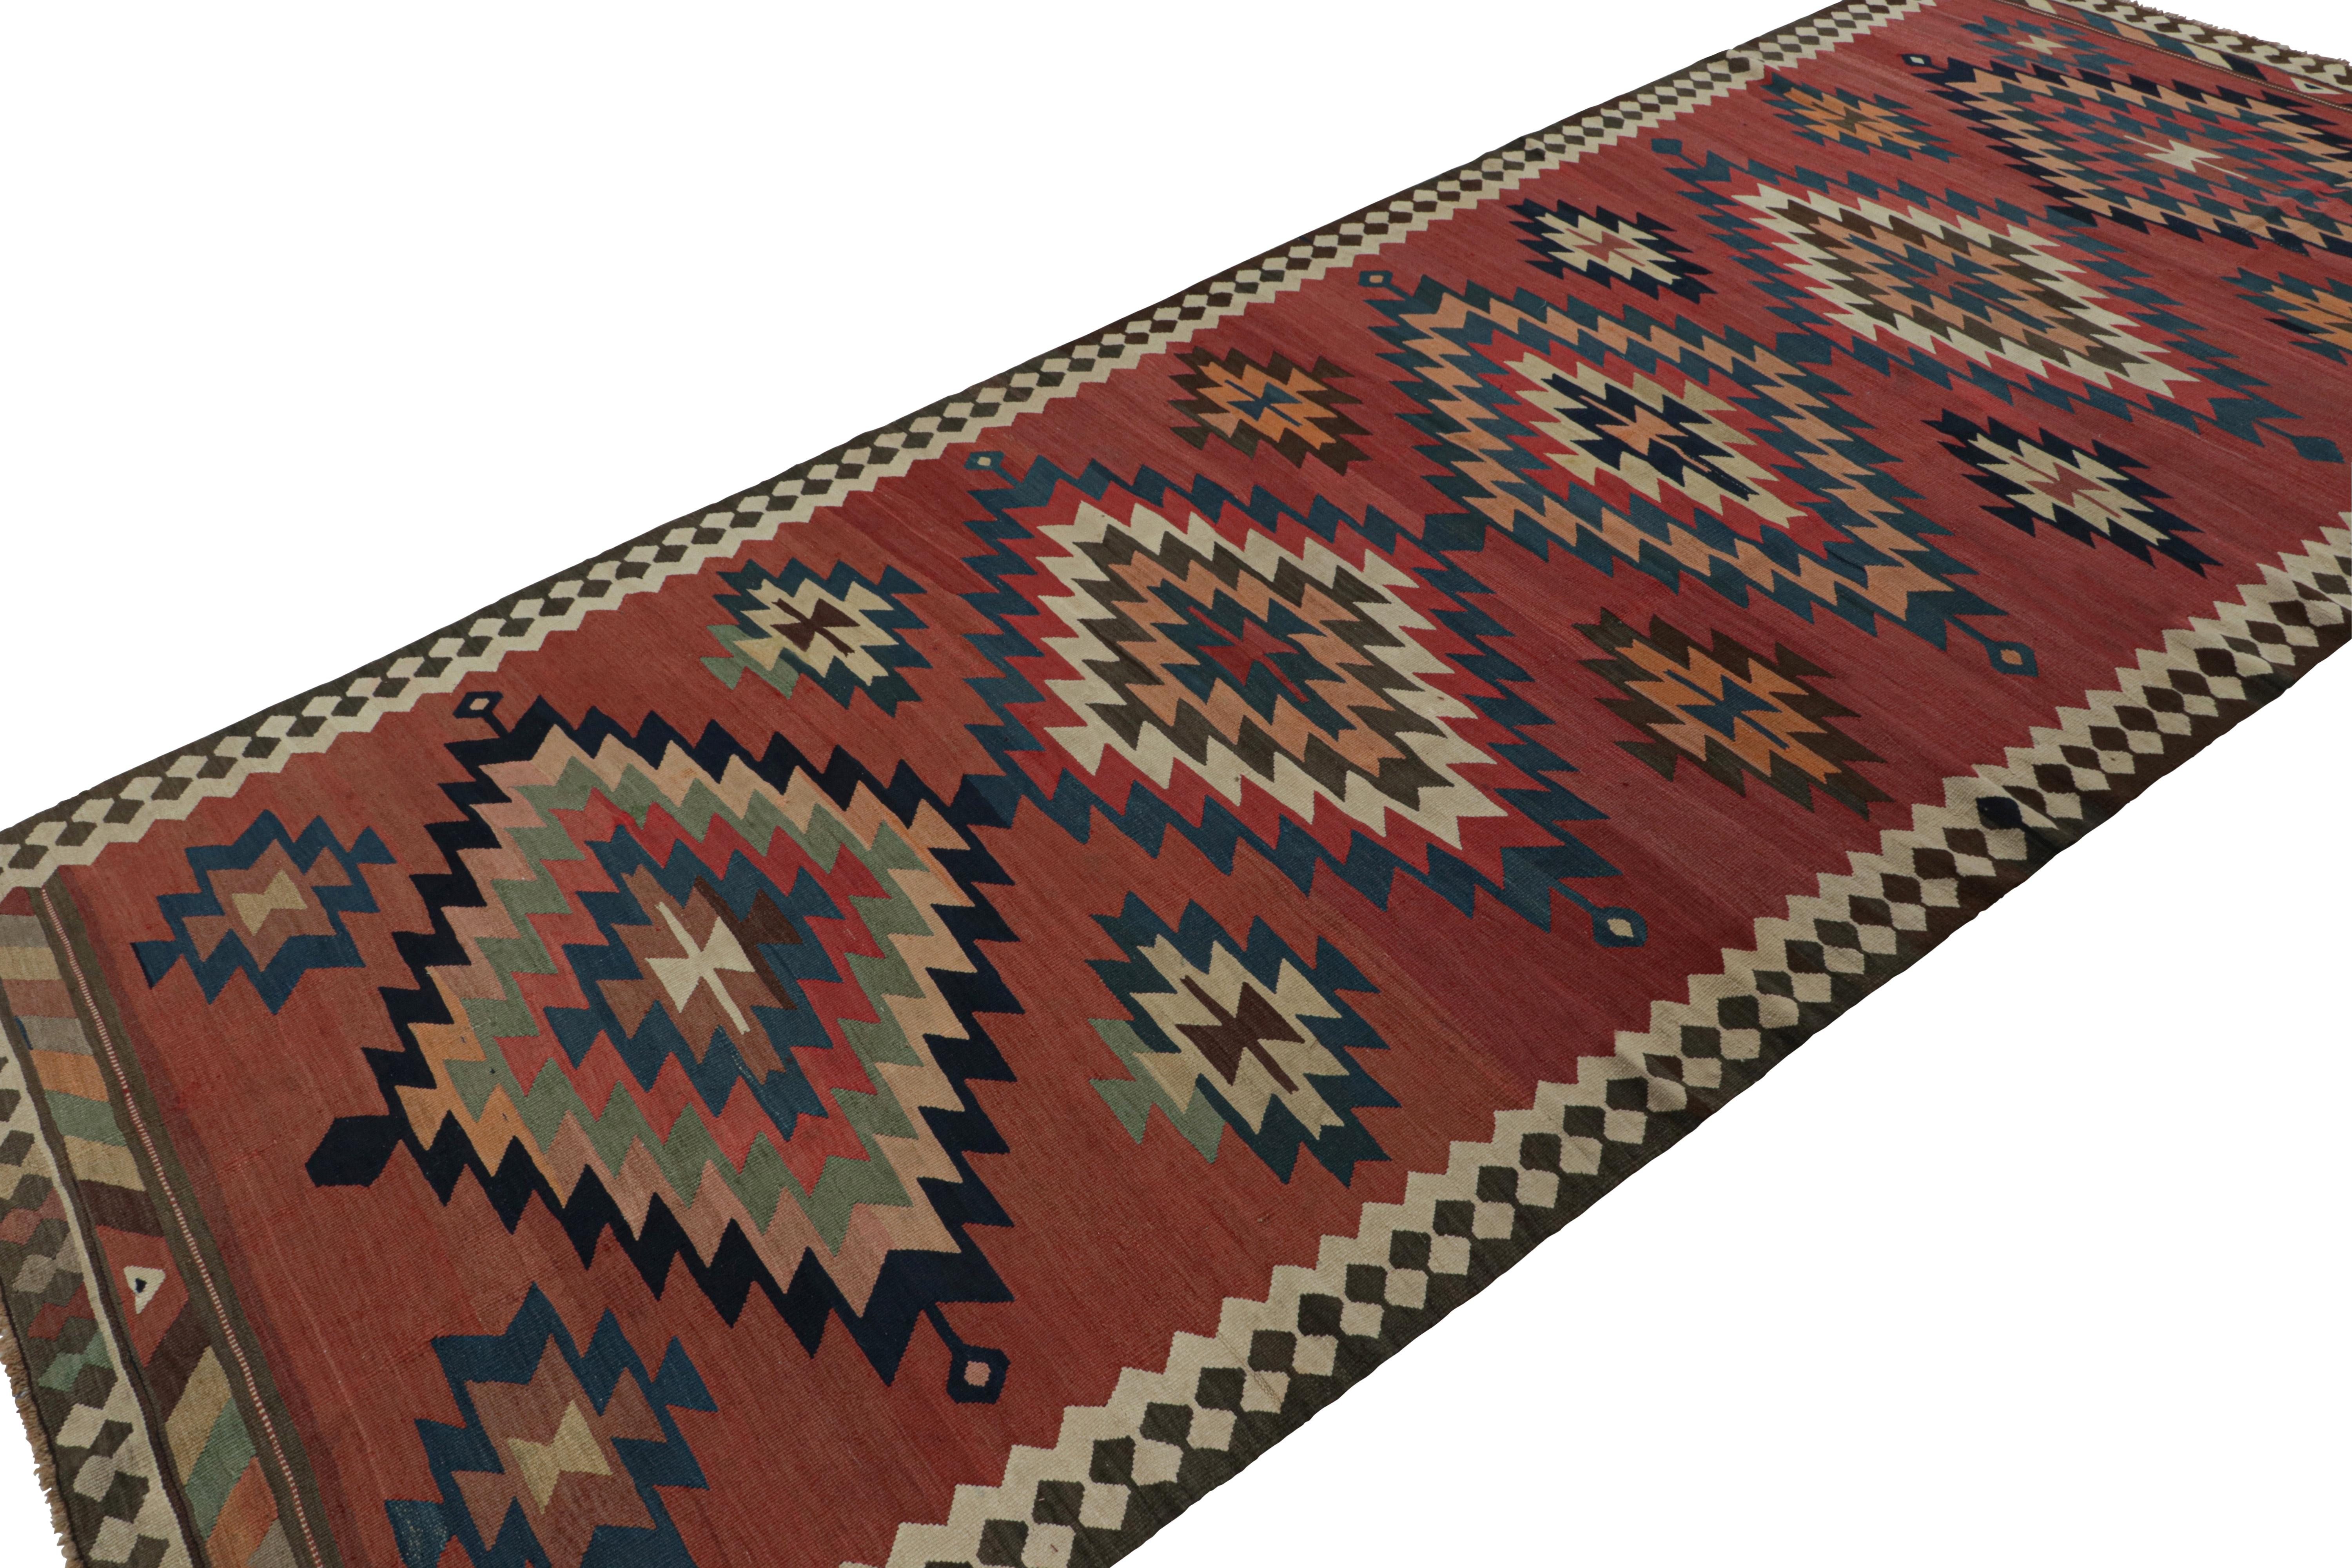 Handwoven in wool, circa 1950-1960, this 5x13 Afghani tribal Kilim rug, with large medallions, is a special curation in the Rug & Kilim collection. 

On the design: 

A special piece in the Rug & Kilim collection given its rare quality, this rug